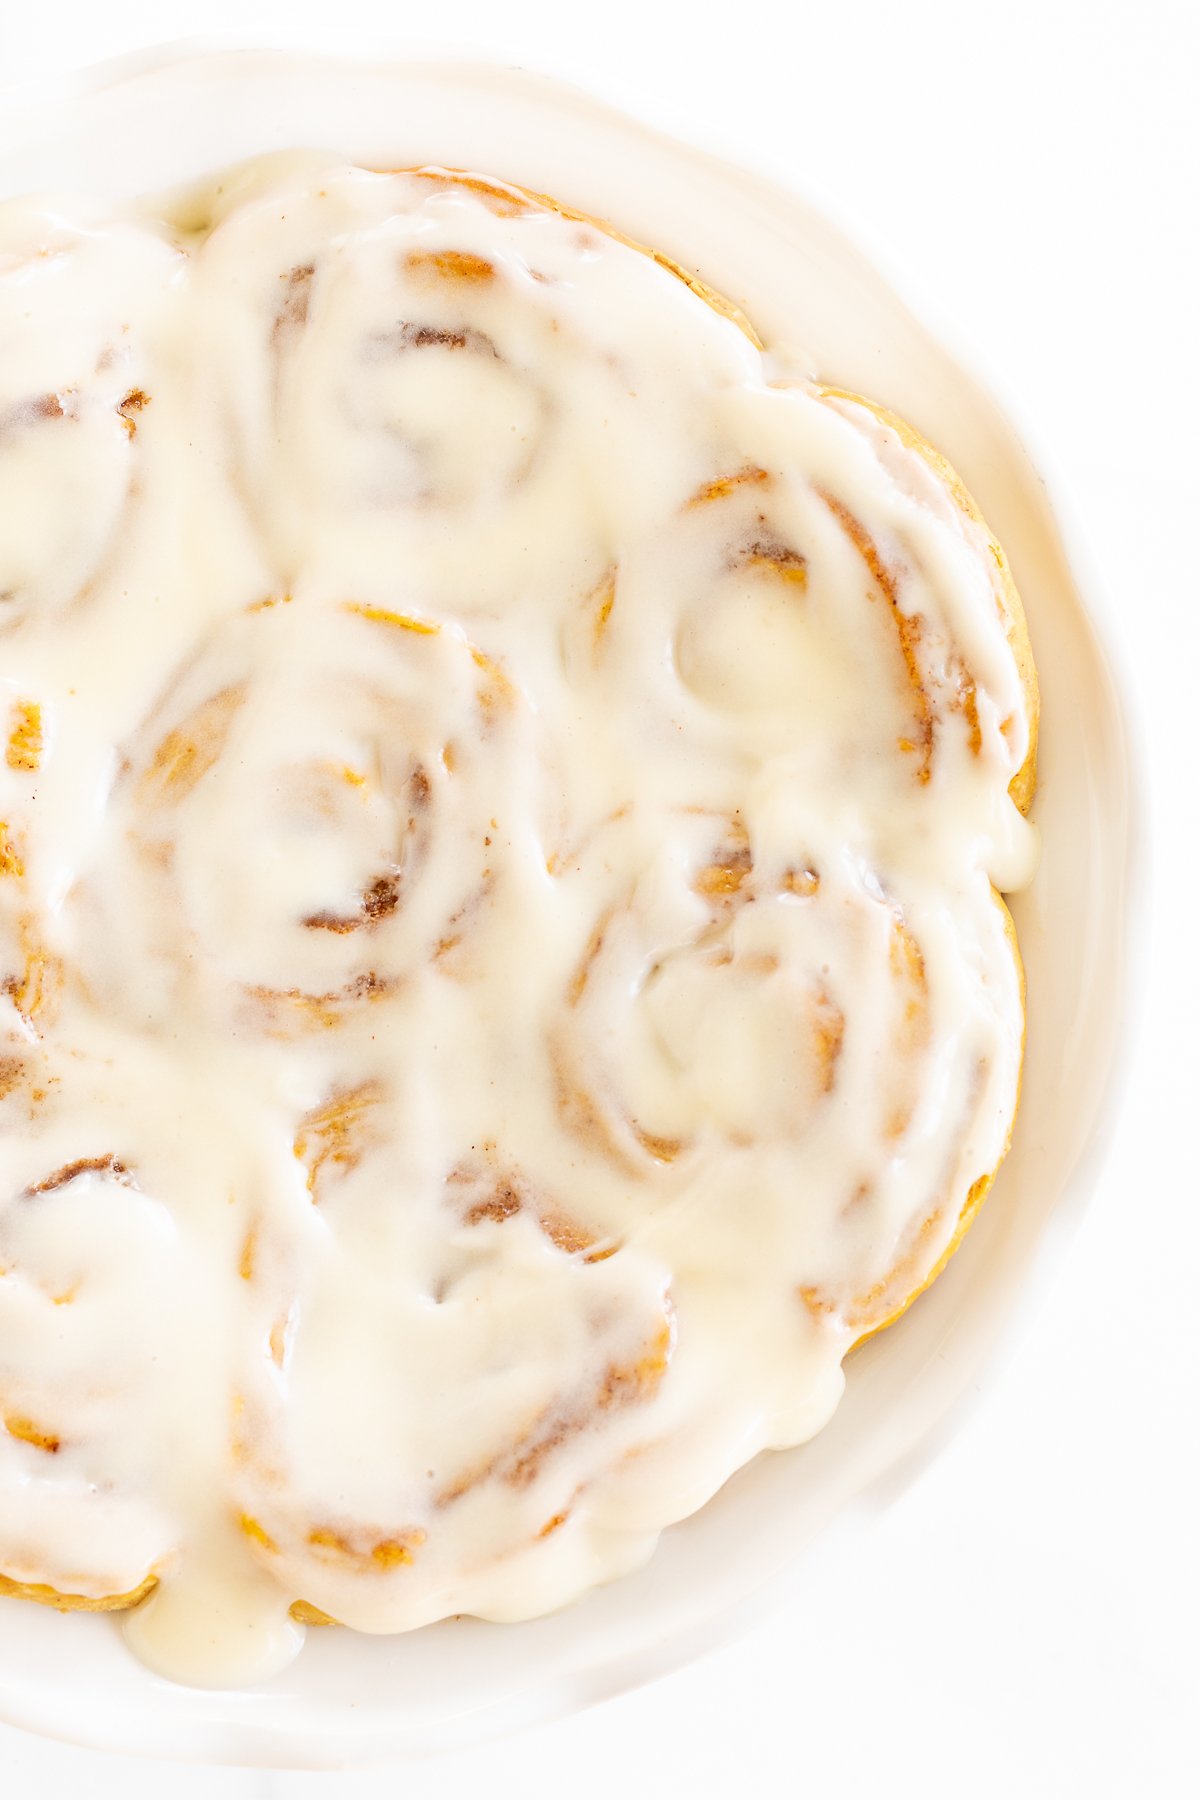 A plate of pumpkin cinnamon rolls with icing on top.